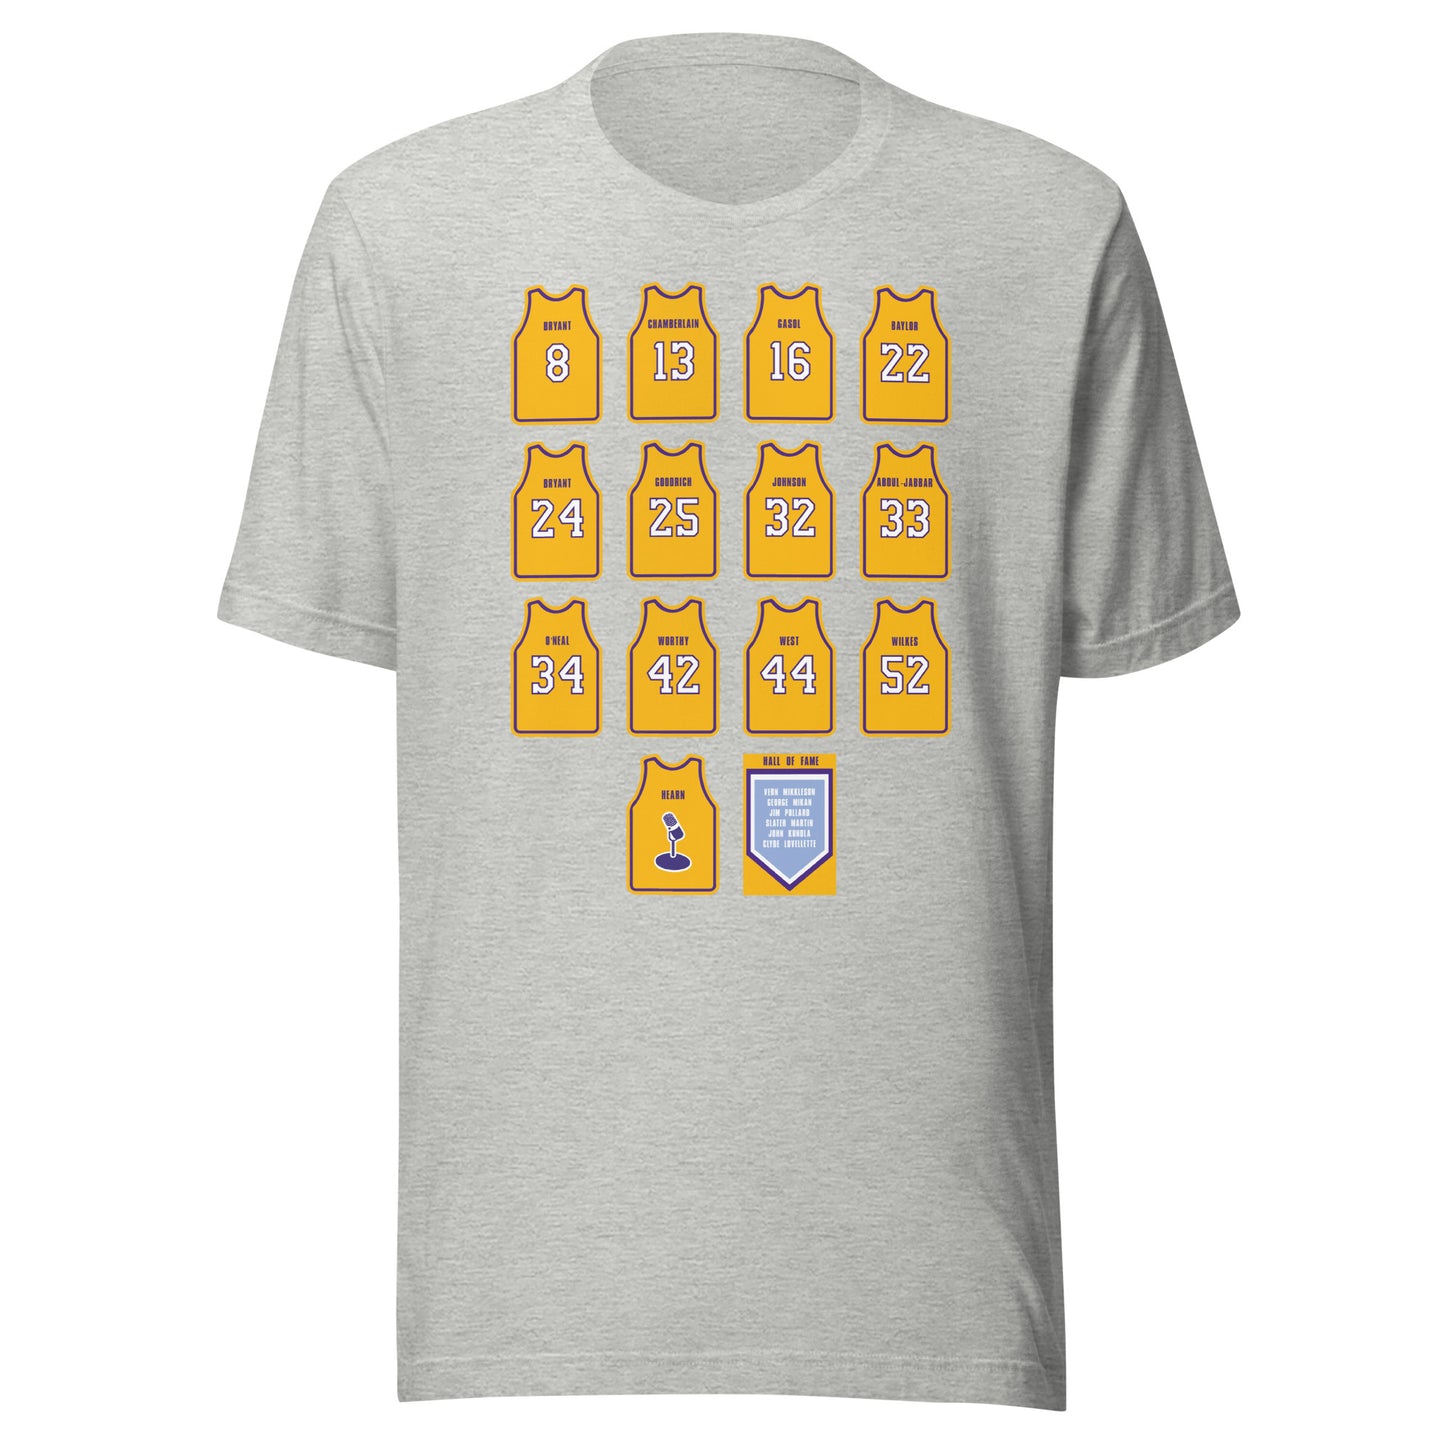 Los Angeles Lakers Retired Jerseys Illustrated Graphic Tee